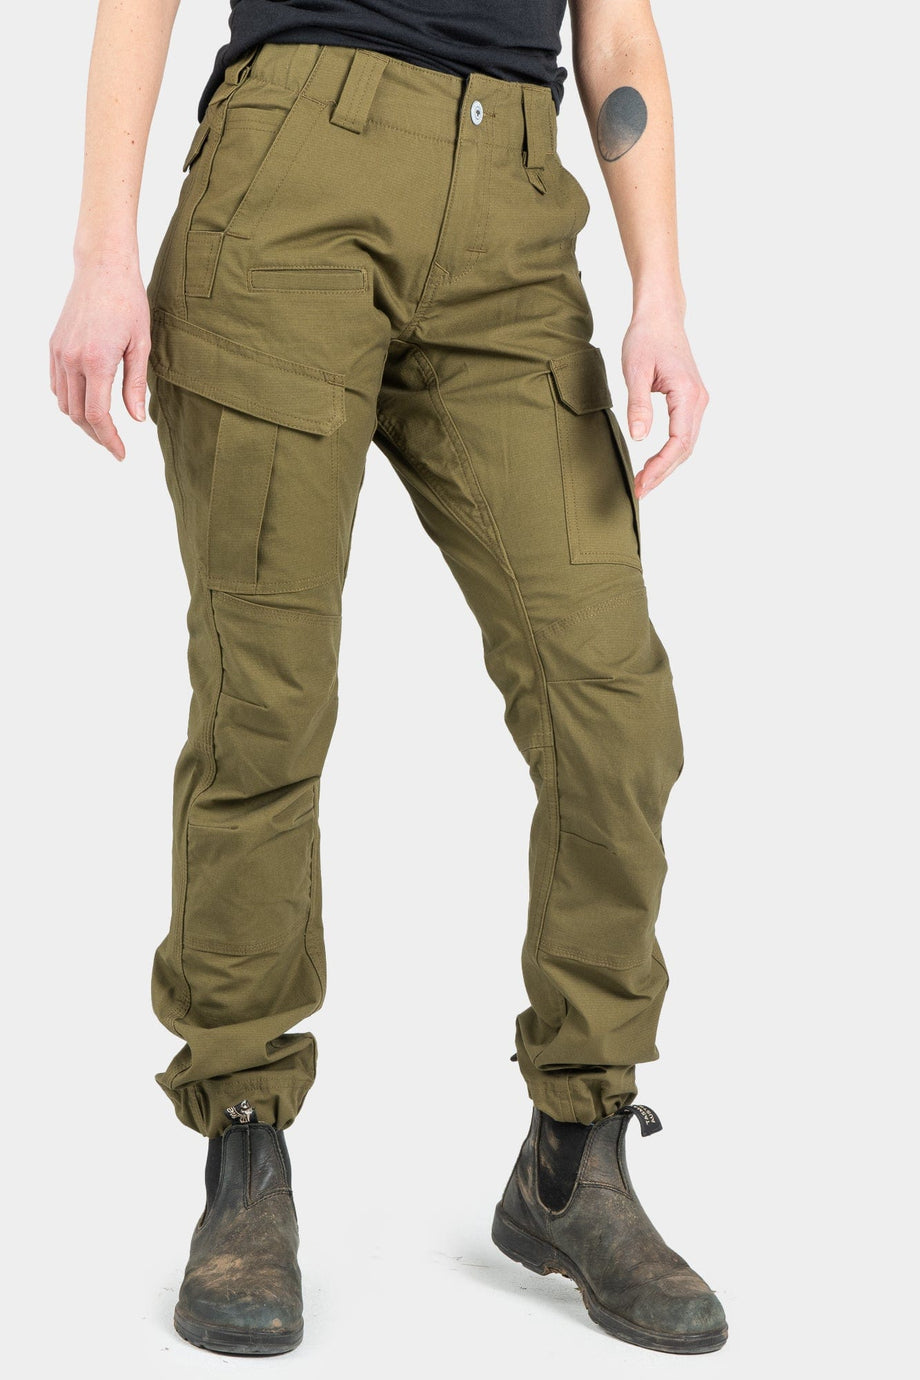 Dovetail Workwear Women's Ready Set Cargo - Olive Green Ripstop